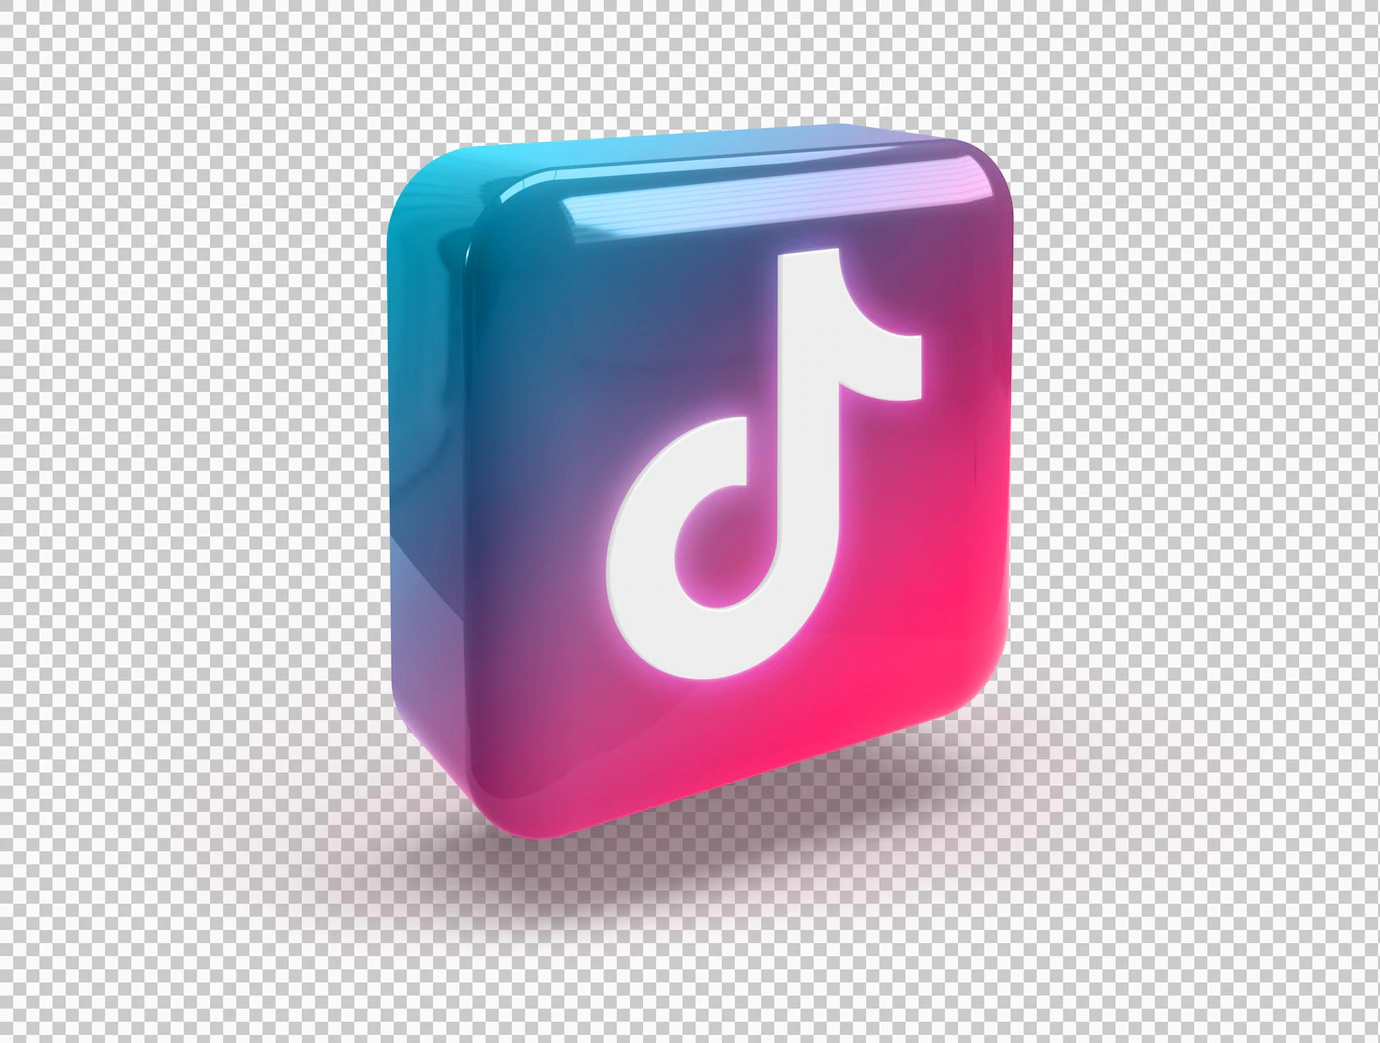 3d Rounded Square With Glossy Tiktok Logo 125540 1541